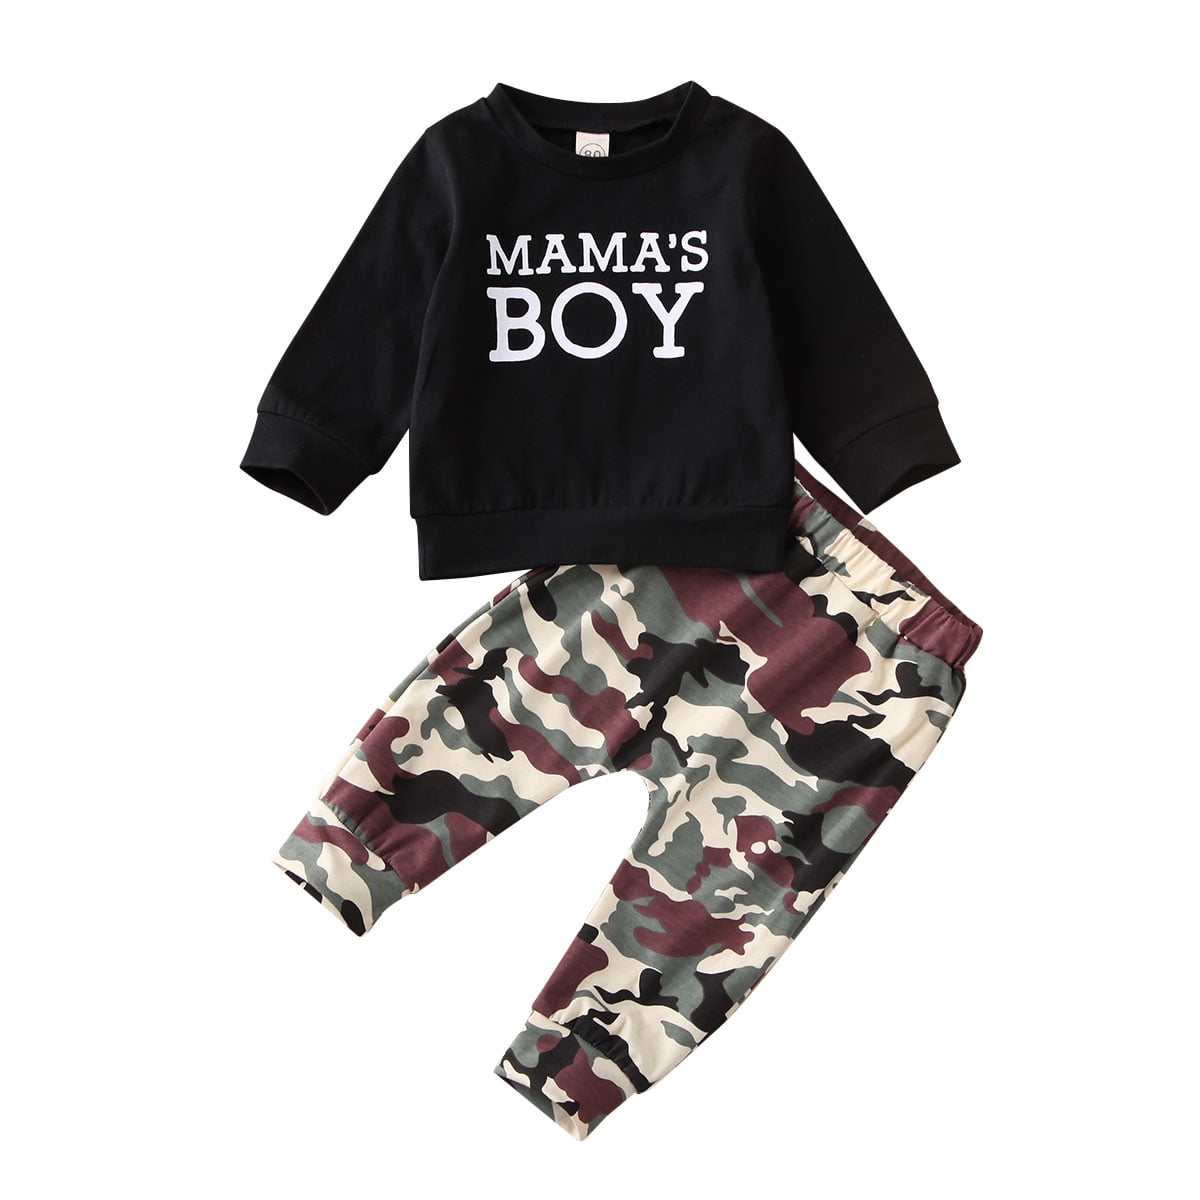 Toddler Baby Boy Outfit Letter Printed Long Sleeve T-shirt Tops Long Pants Set 